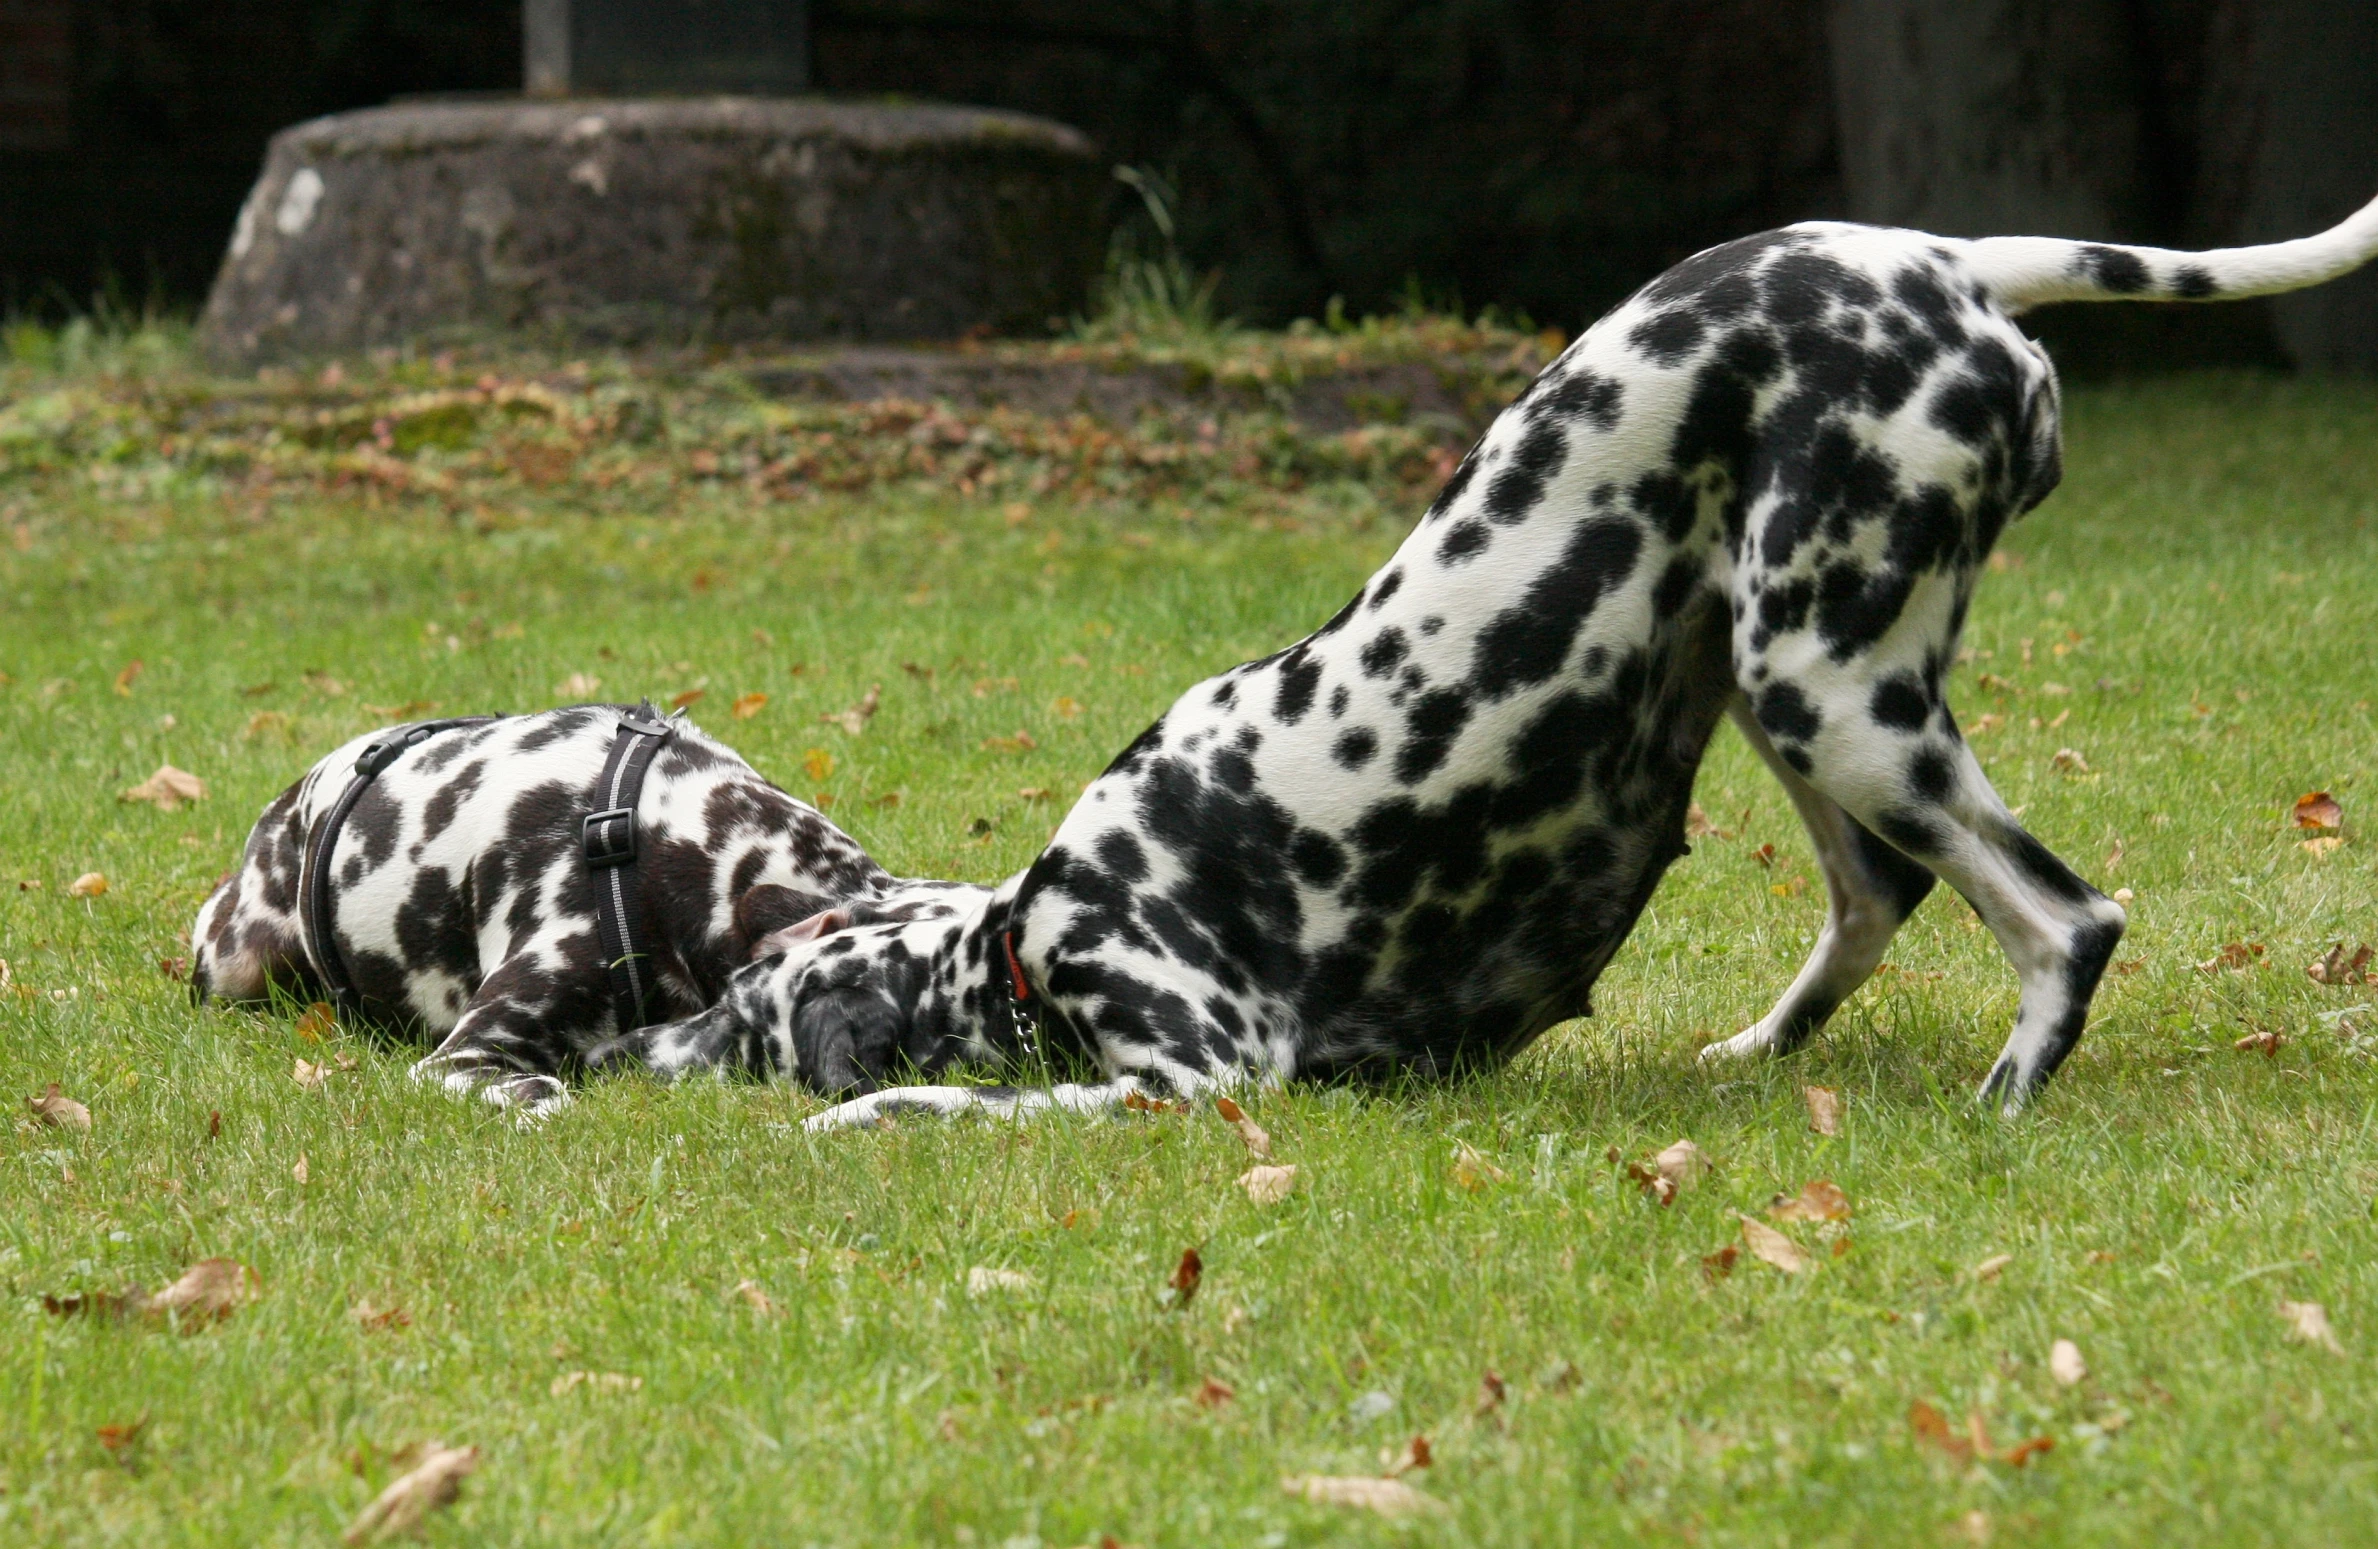 a dalmatian dog rolling around on its back